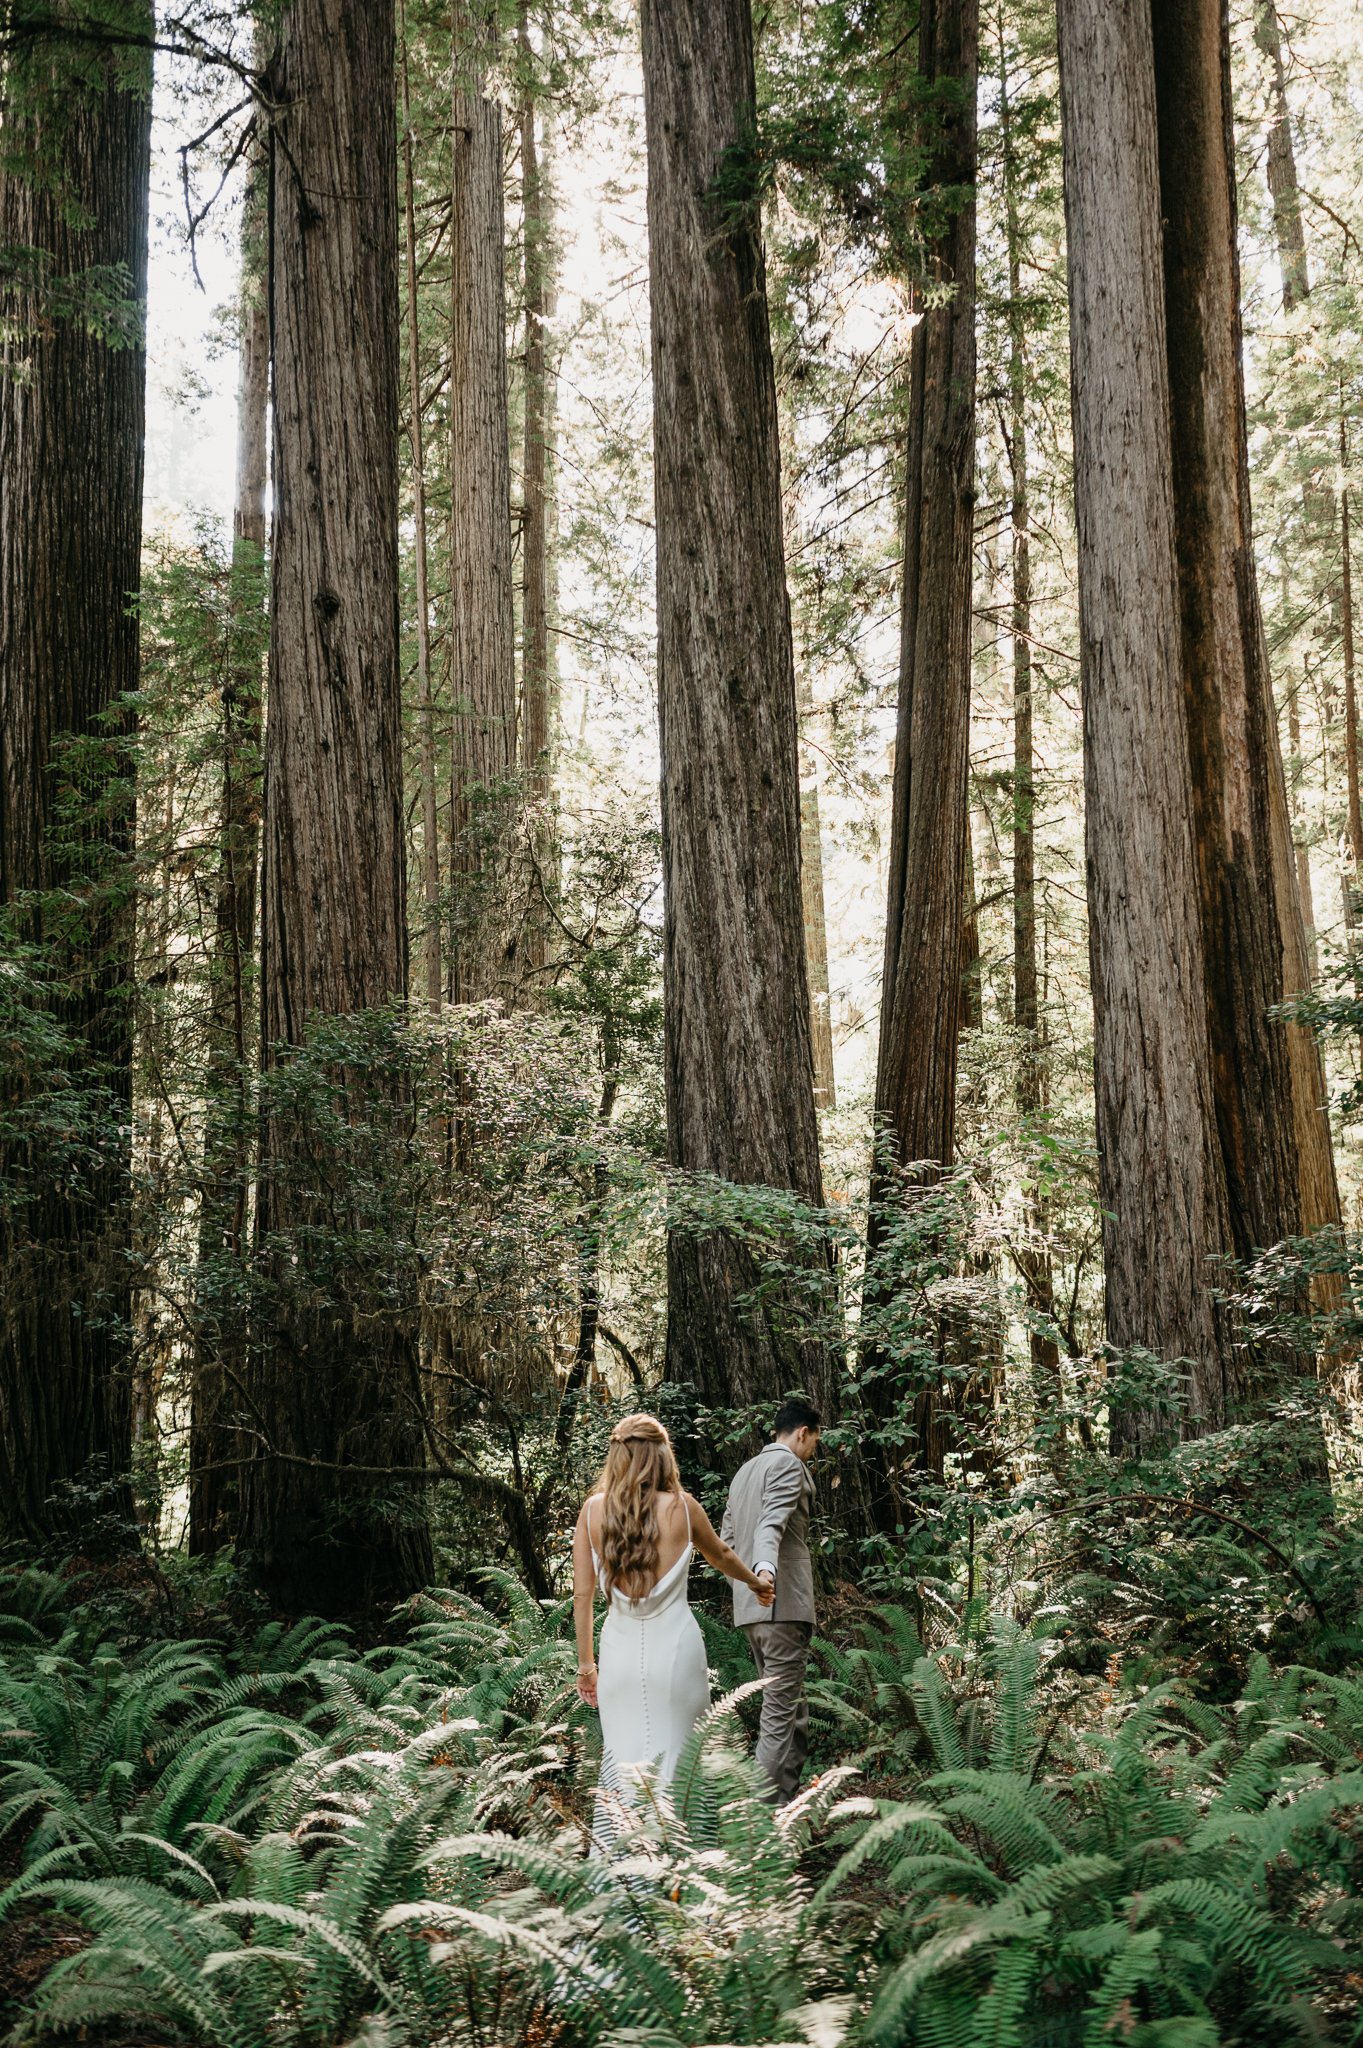 Bride and groom in wedding attire in Oregon Redwood forest waking hand and hand through forest 